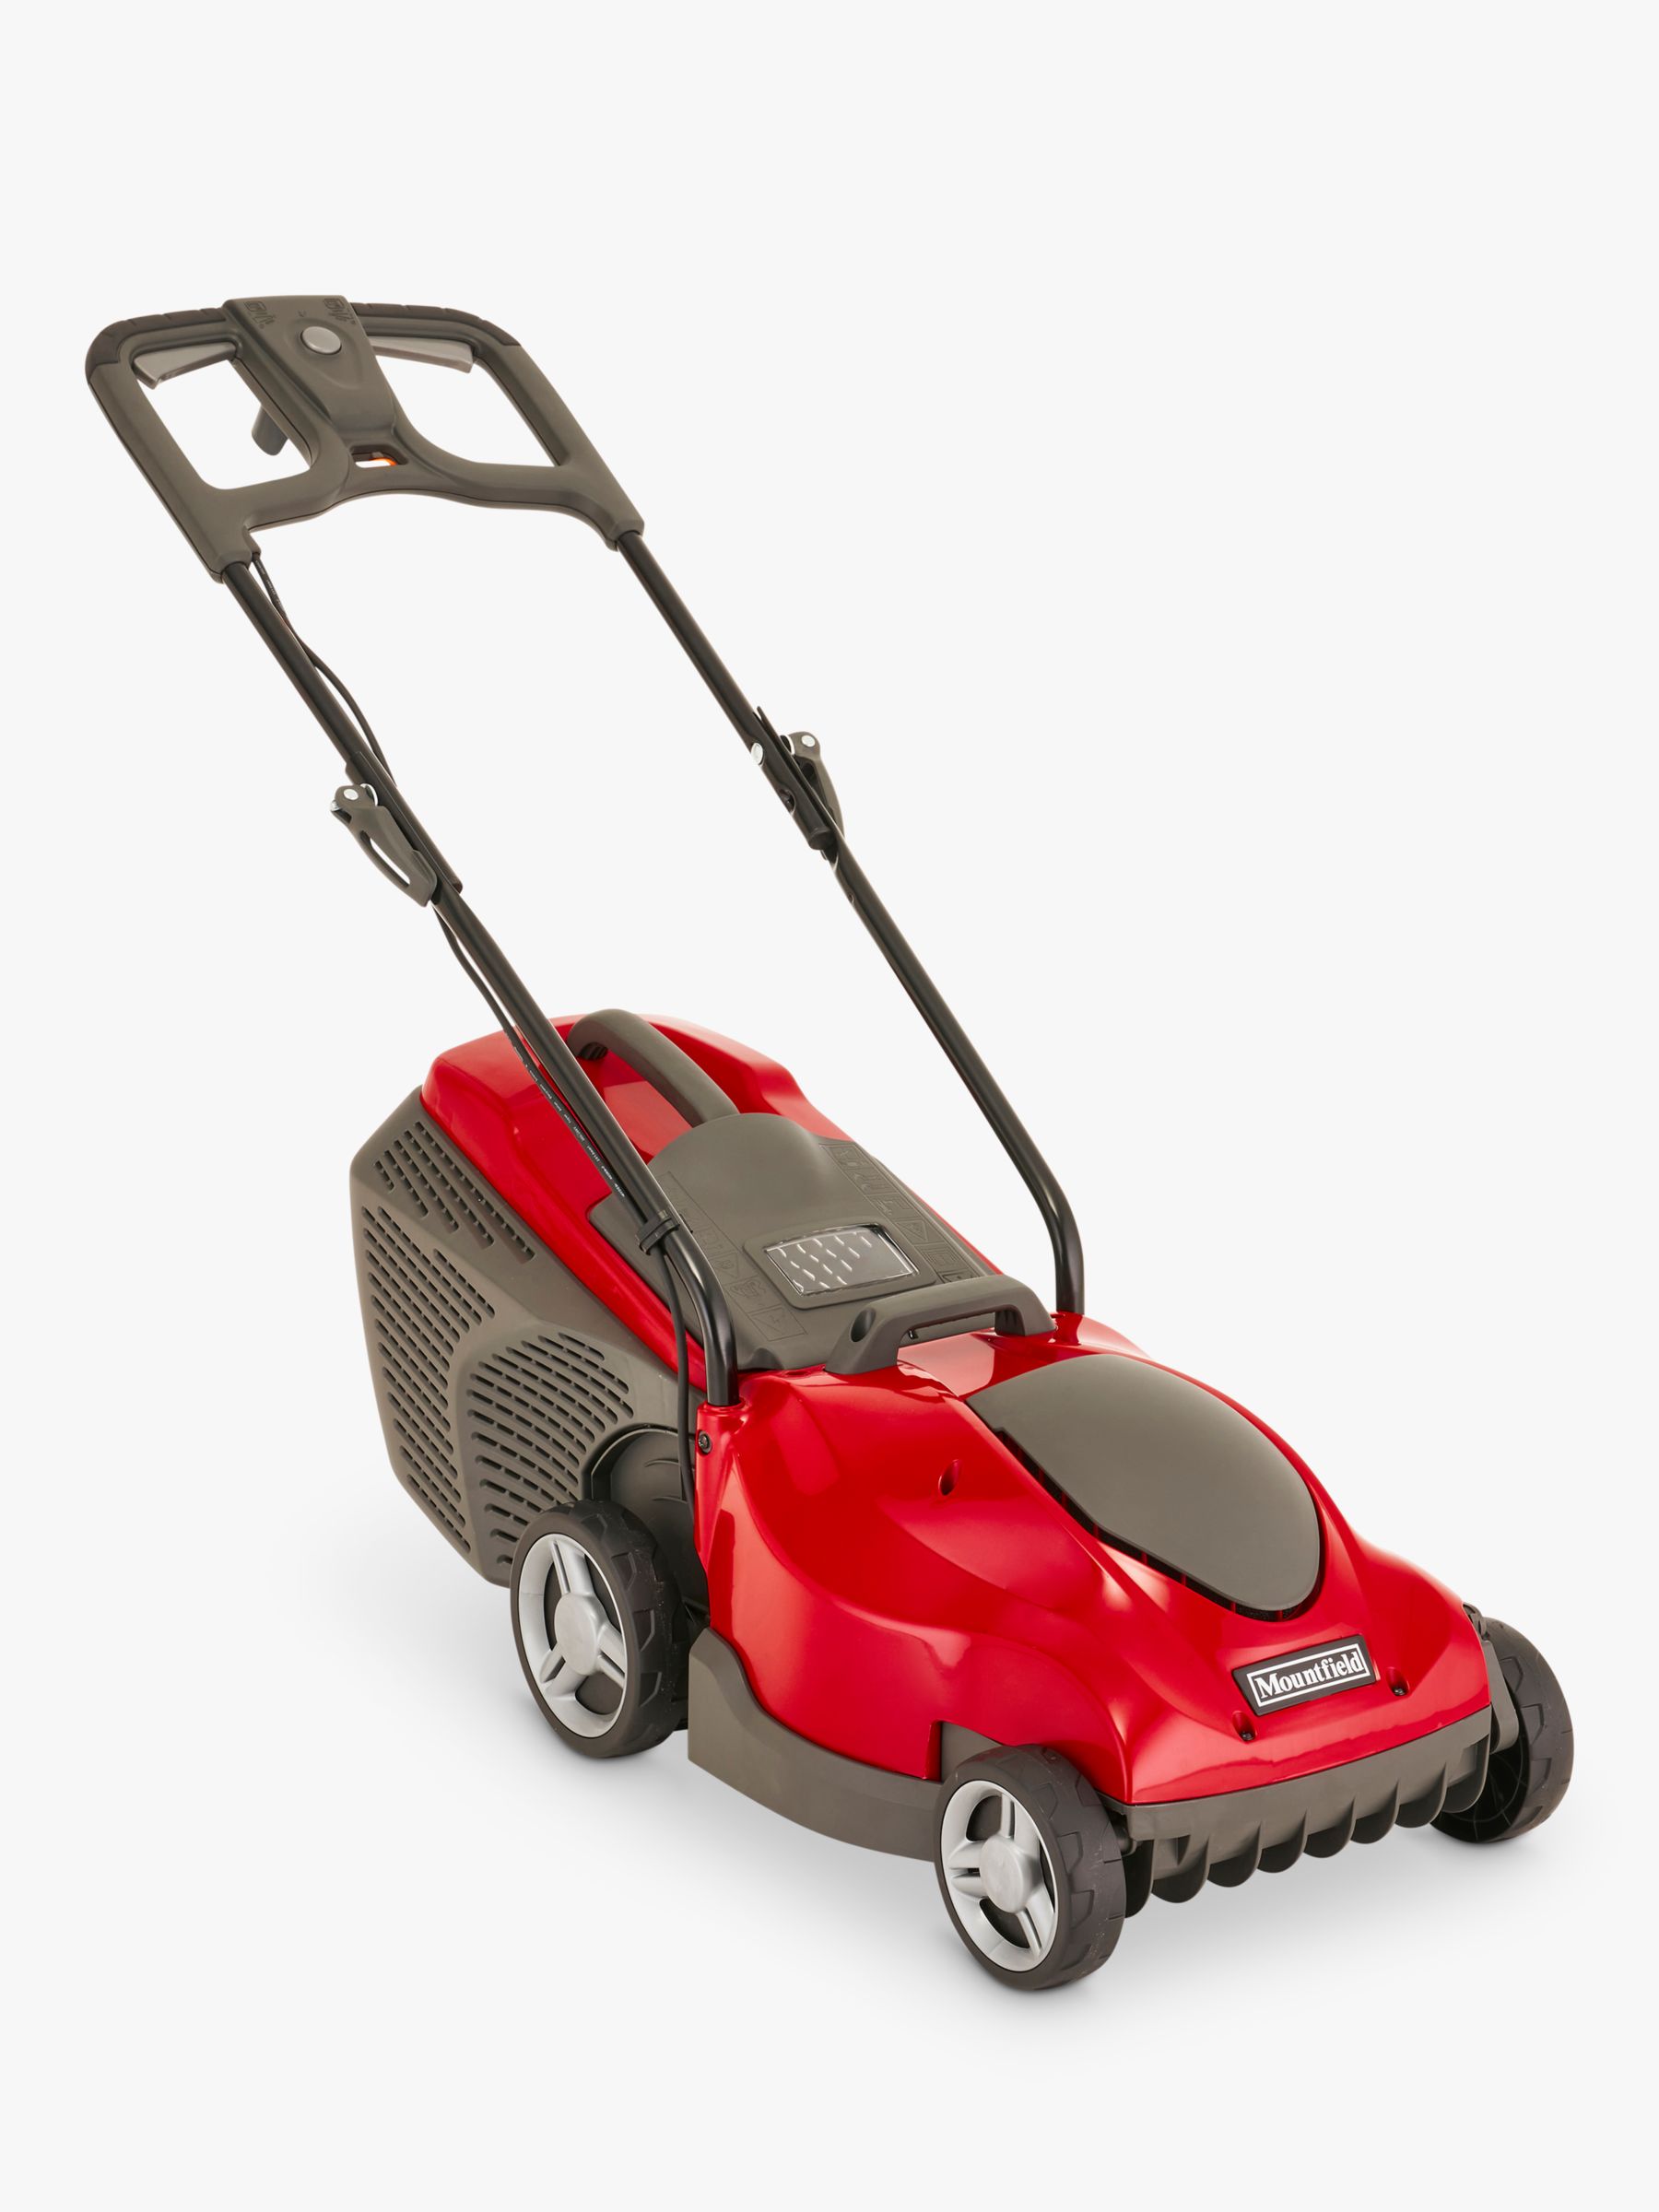 Mountfield Princess 34 Corded Electric Lawn Mower